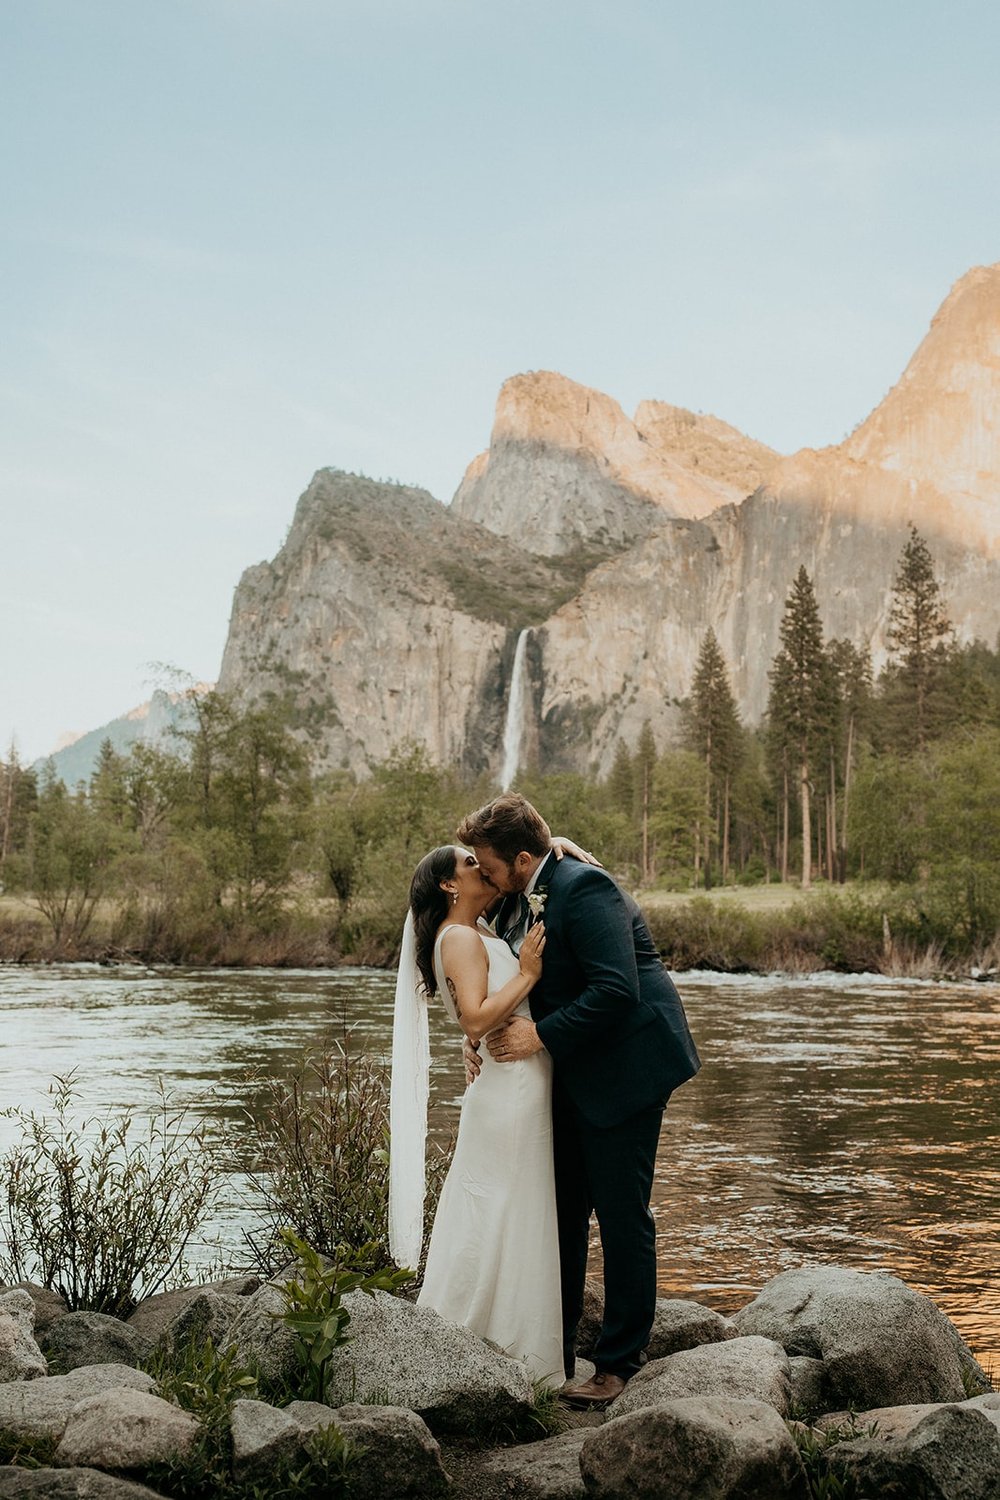 Bride and groom kiss in front of a lake during their Yosemite National Park elopement